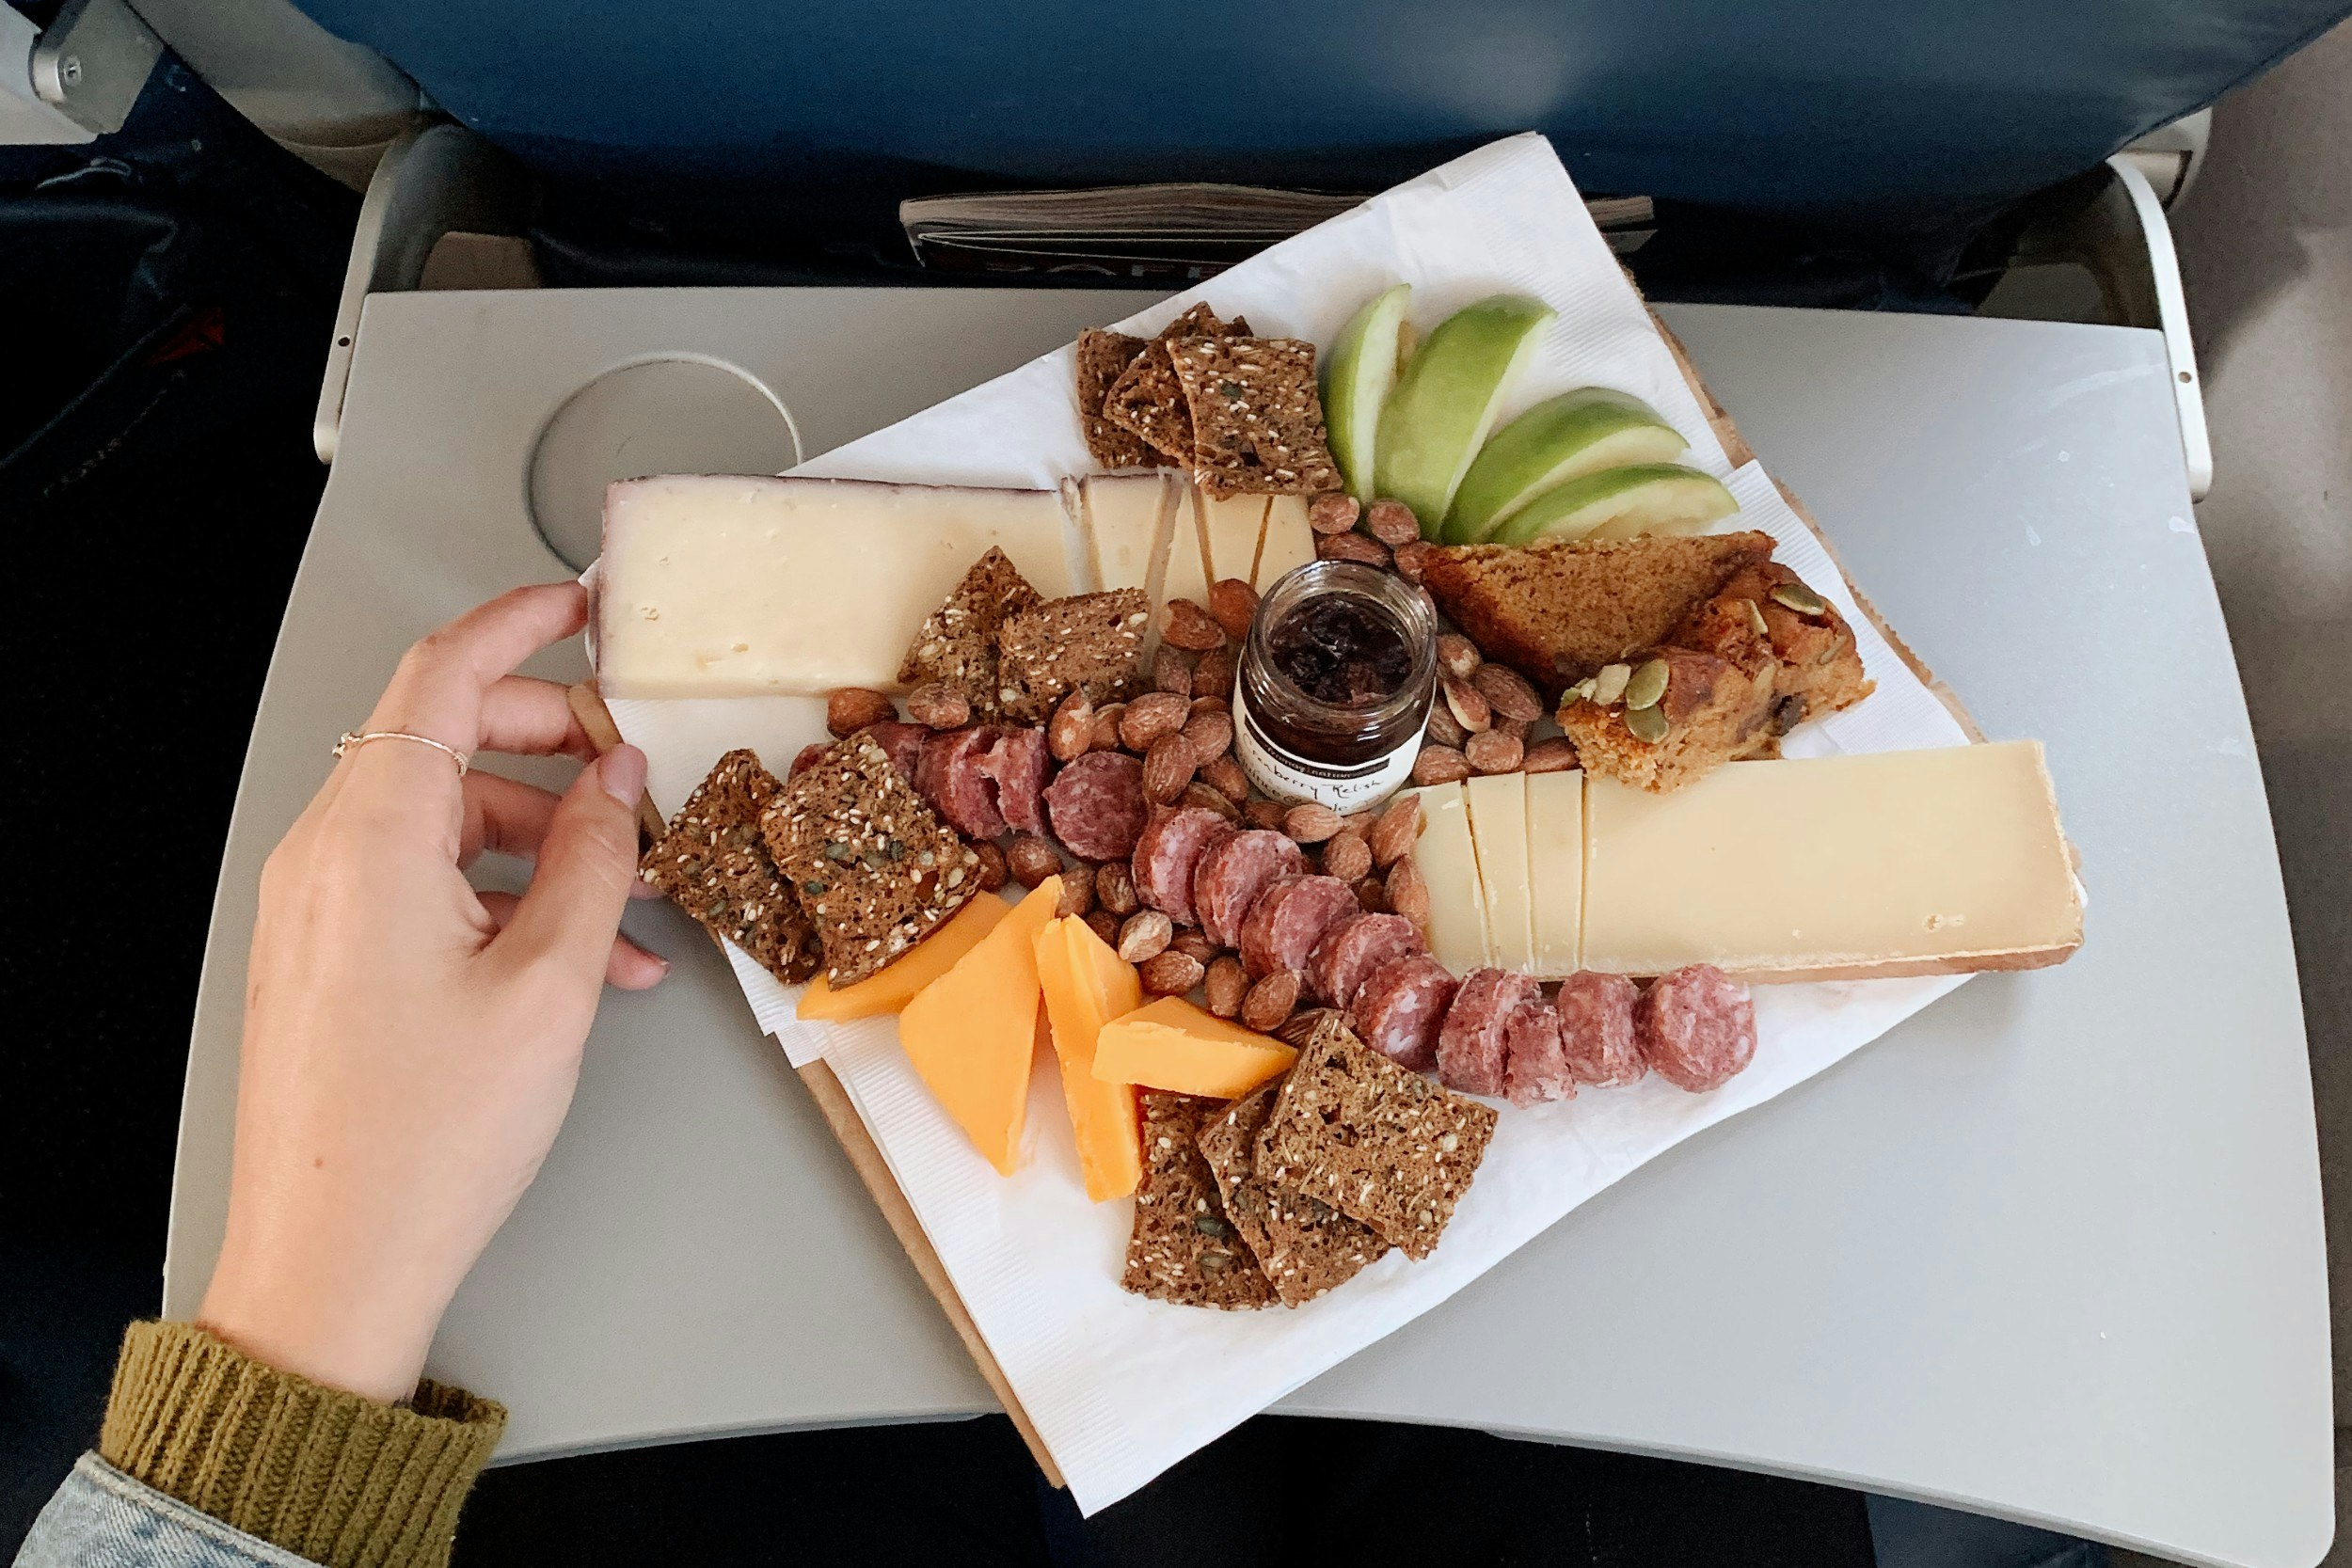 A cheese board  on a plane